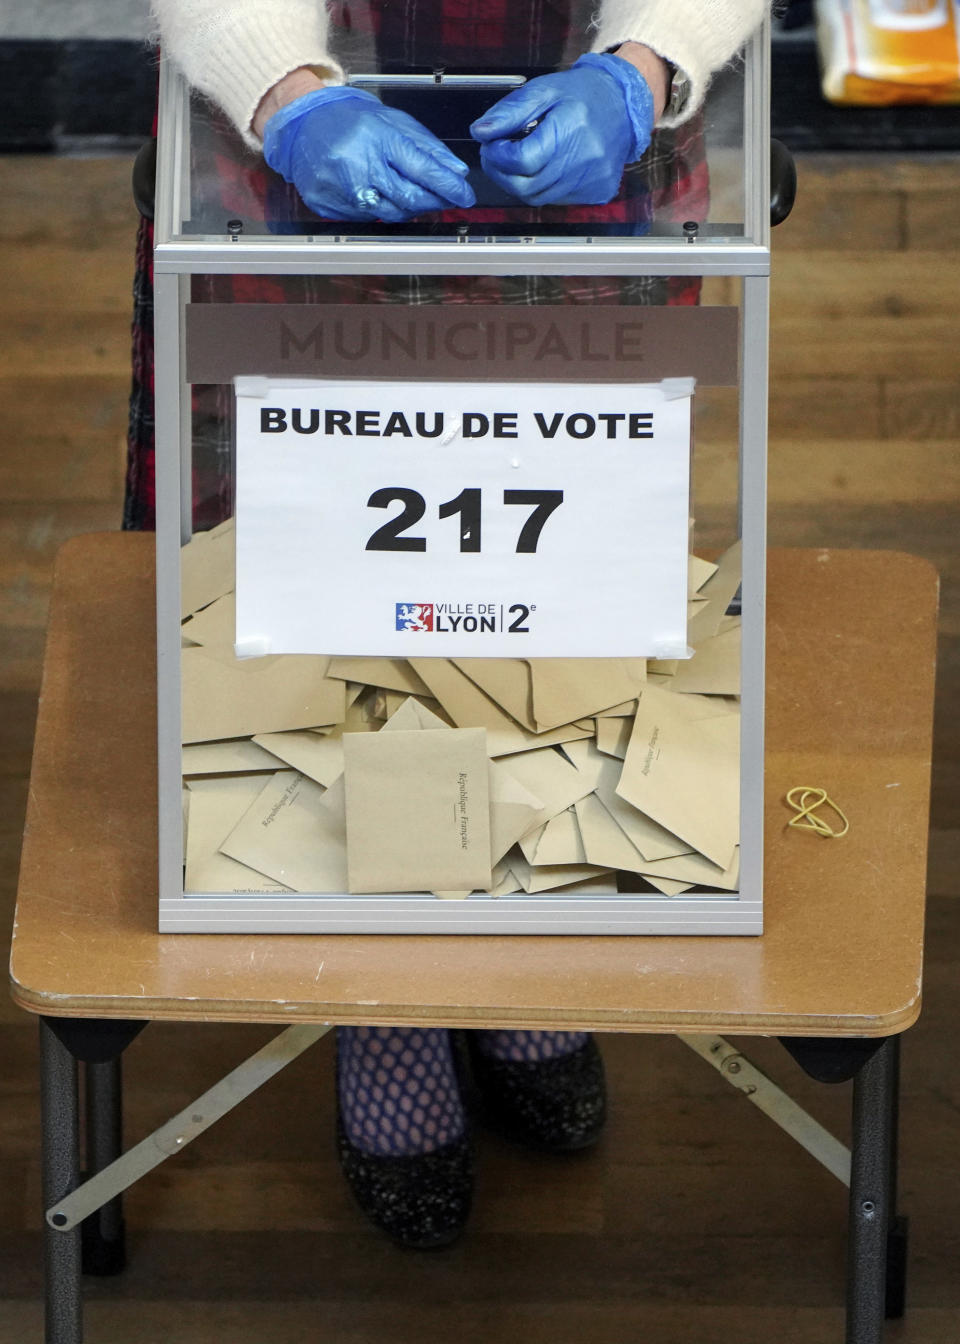 A volunteer using gloves waits for people in a polling station during local elections in Lyon, central France, Sunday, March 15, 2020. France is holding nationwide elections Sunday to choose all of its mayors and other local leaders despite a crackdown on public gatherings because of the new virus. For most people, the new coronavirus causes only mild or moderate symptoms. For some it can cause more severe illness. (AP Photo/Laurent Cipriani)